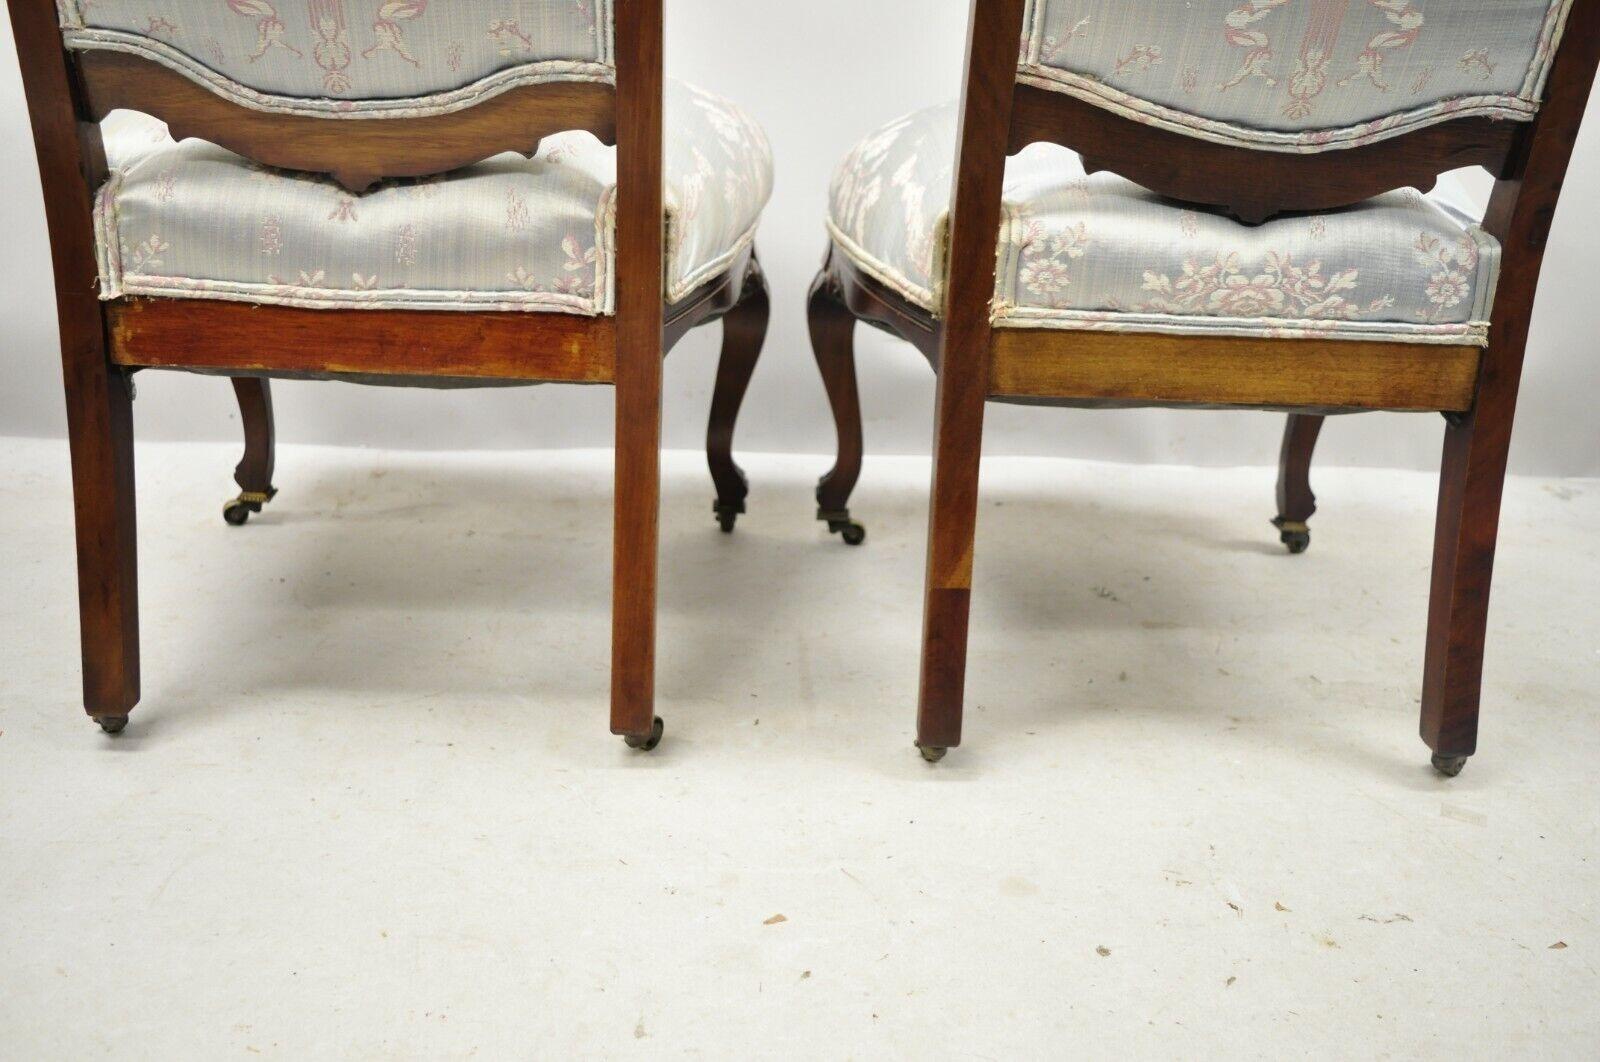 Victorian Floral Scrollwork Carved Mahogany Parlor Slipper Side Chairs - a Pair For Sale 3